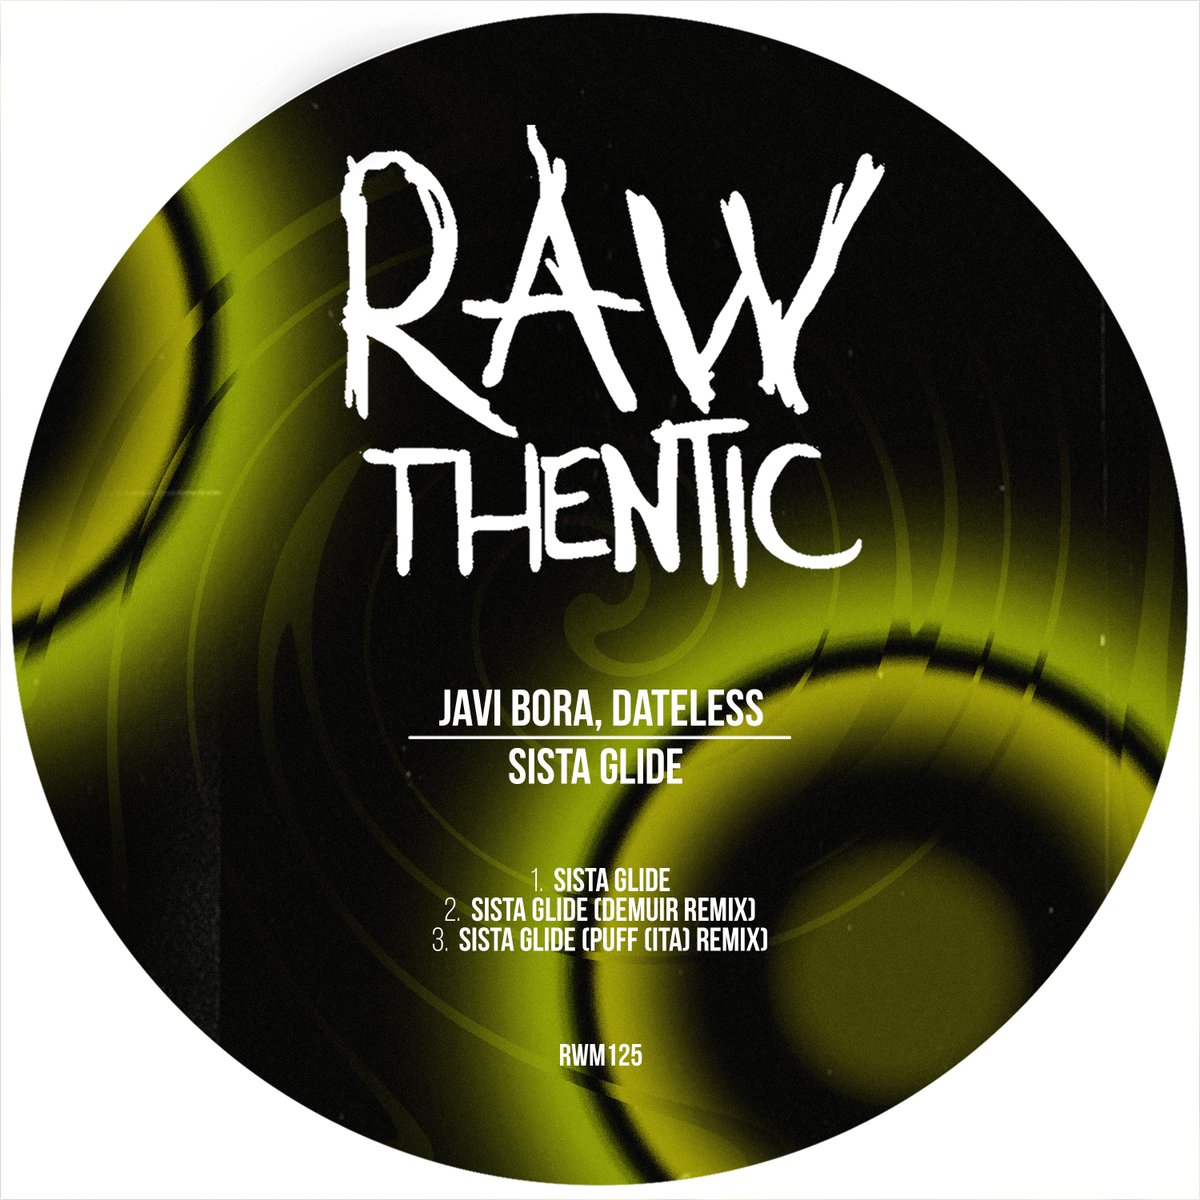 New release with Dateless is out now on @rawthenticmusic! Includes Remixes by Demuir and Puff! Get it here: t.ly/I1SZ3 Supported by Jamie Jones, Jean Pierre and more! Thanks @beatport for the banner!